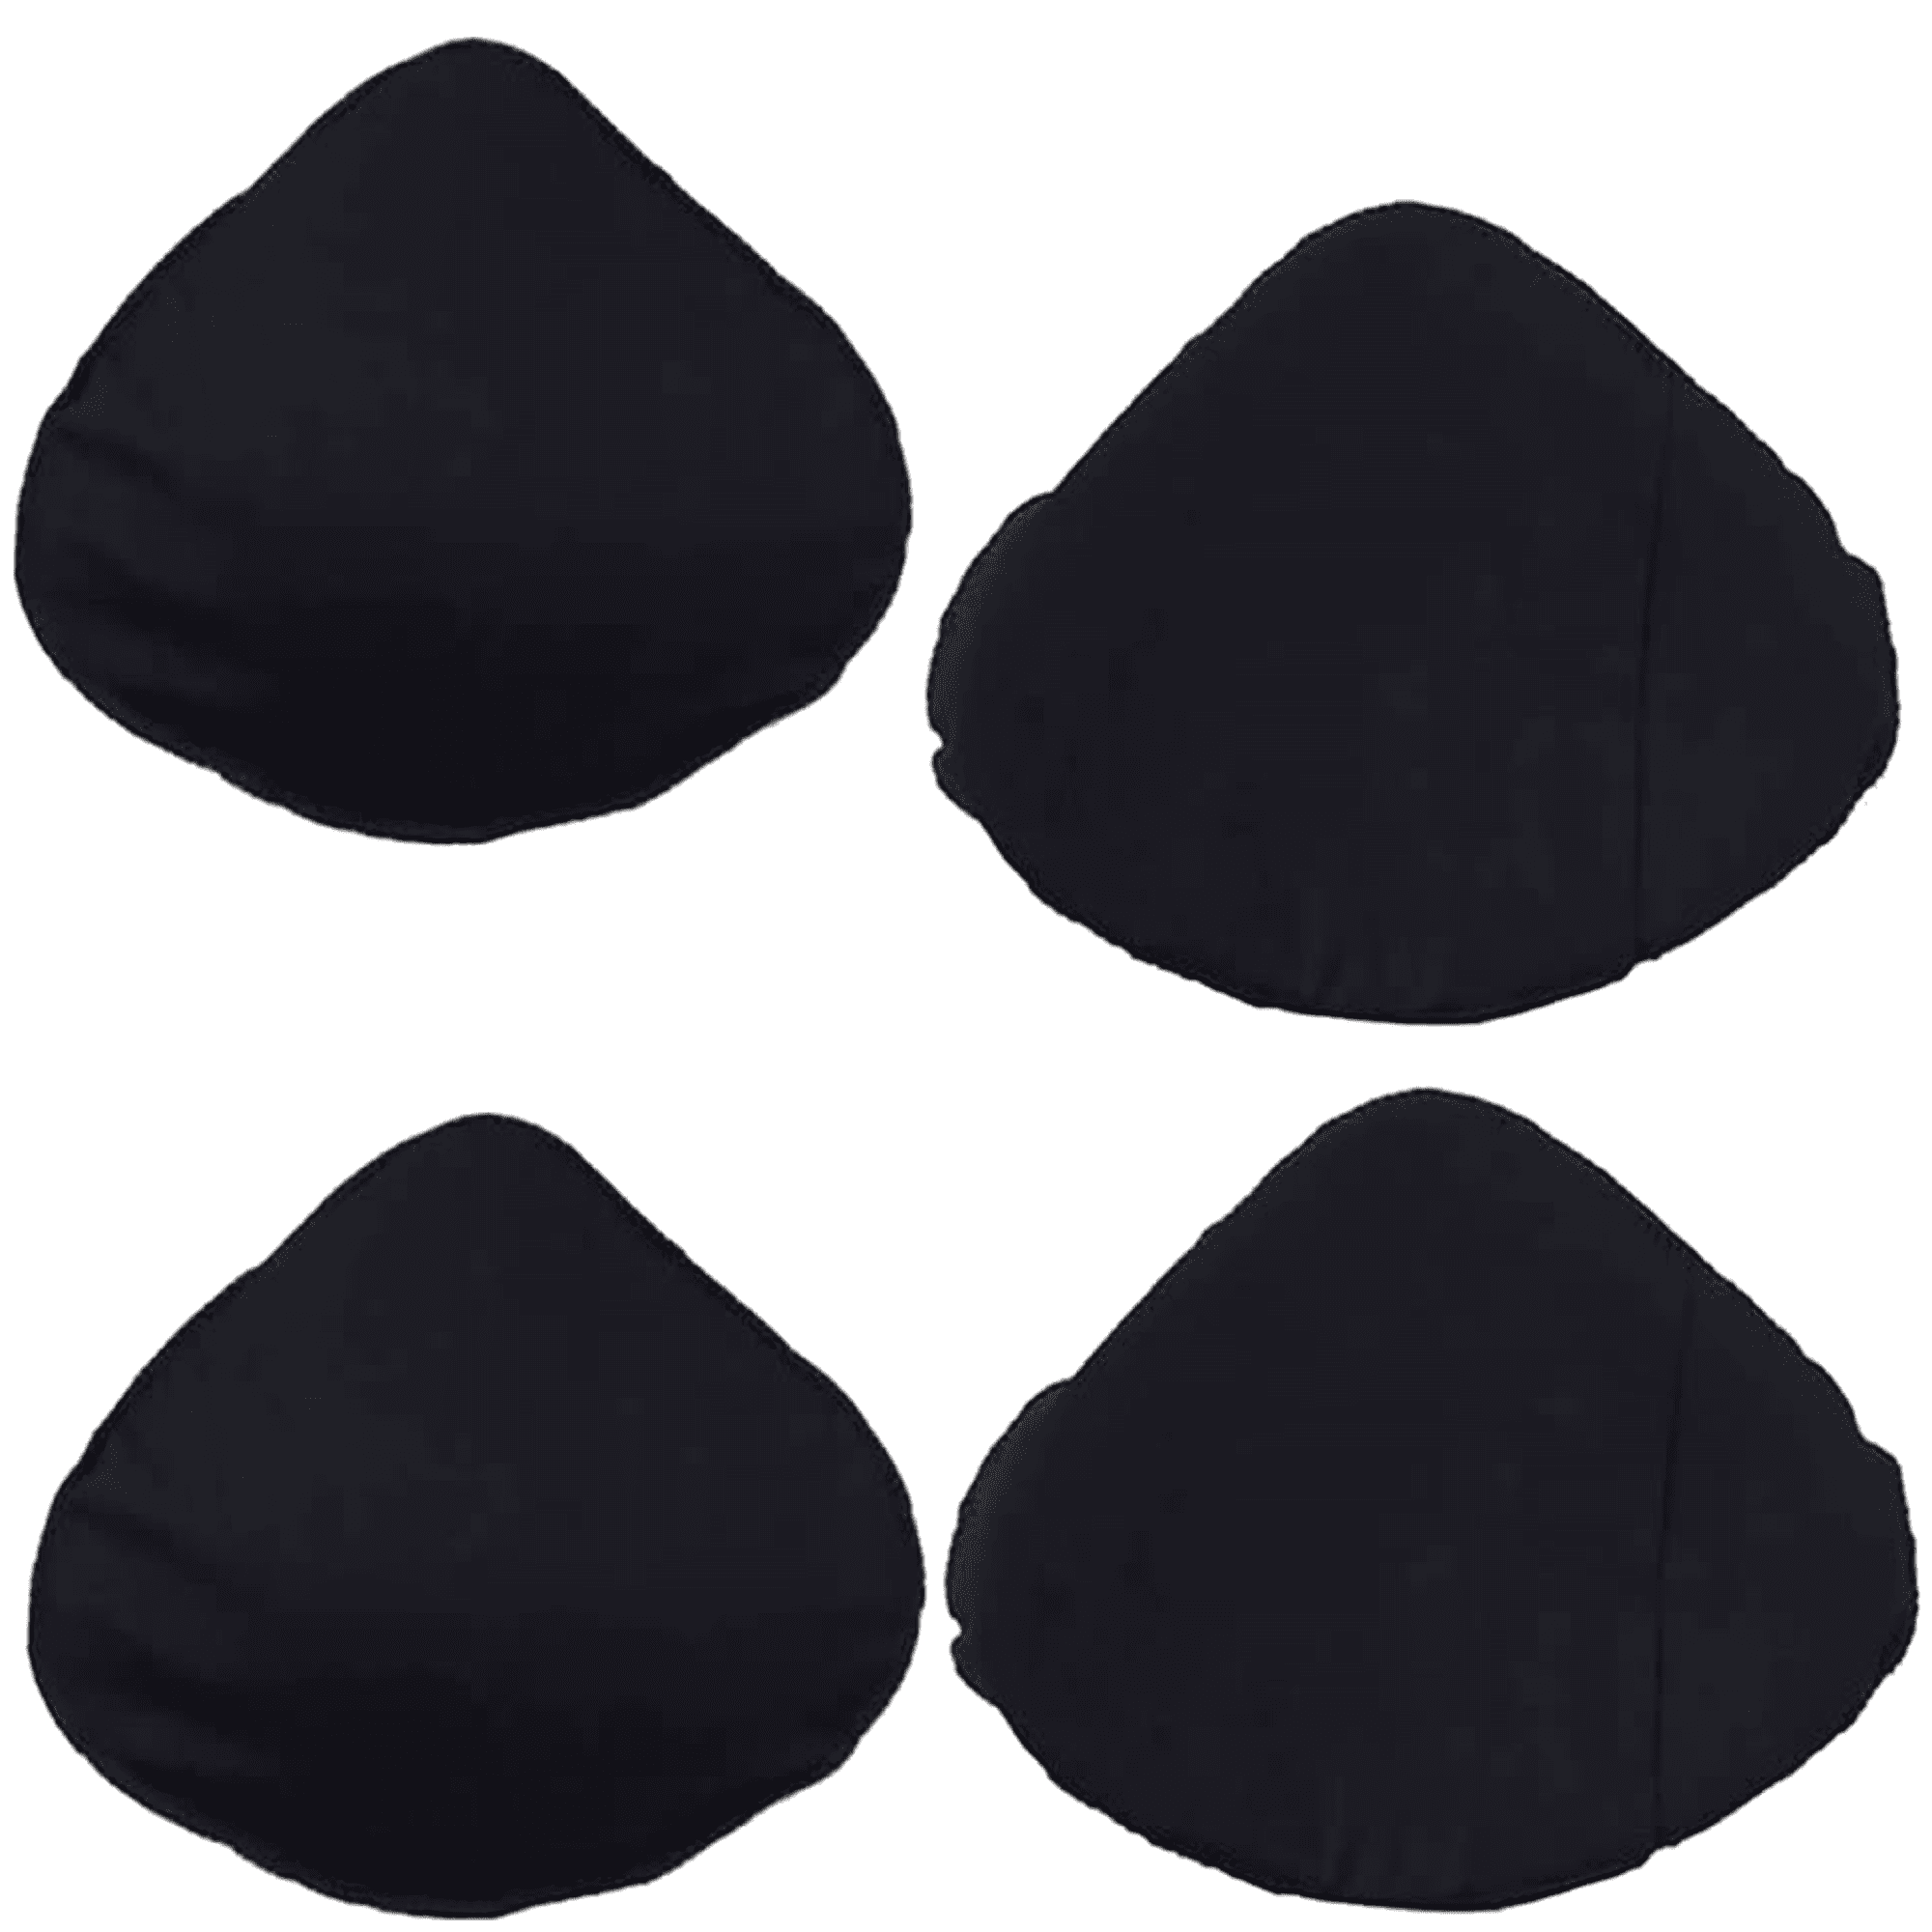 BIMEI 2 Pairs Cotton Protect Pocket For Mastectomy Silicone Breast Forms  Cover Bags for Prosthesis Artificial Fake Boobs Triangular 2 Pair Black L